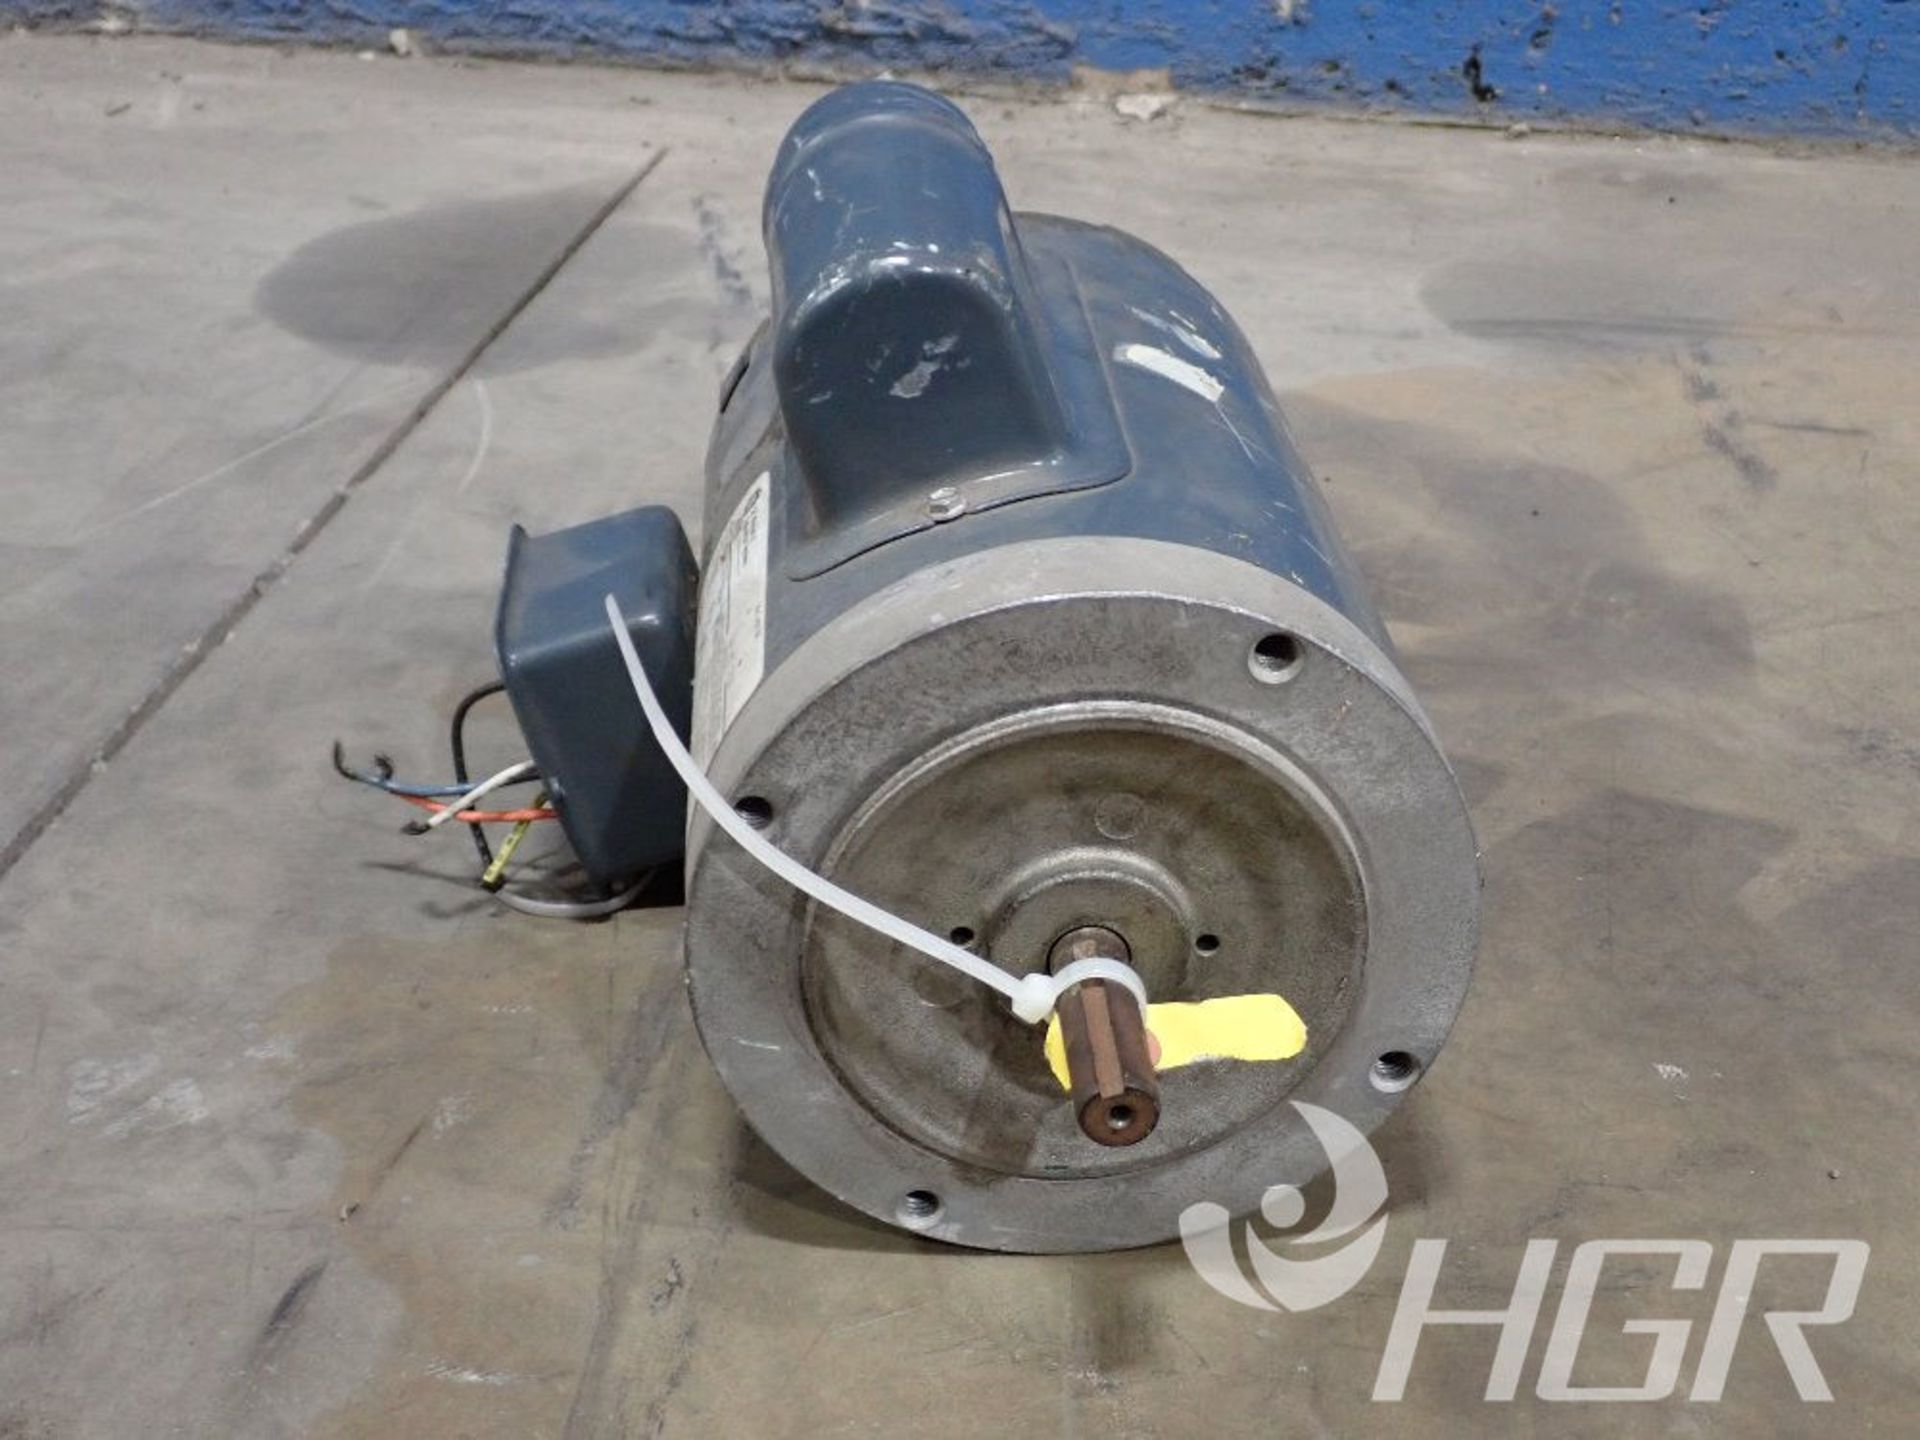 GE MOTOR, Model 5K949TN0035, Date: n/a; s/n n/a, Approx. Capacity: 1HP, Power: 1/60/115/230, - Image 2 of 6